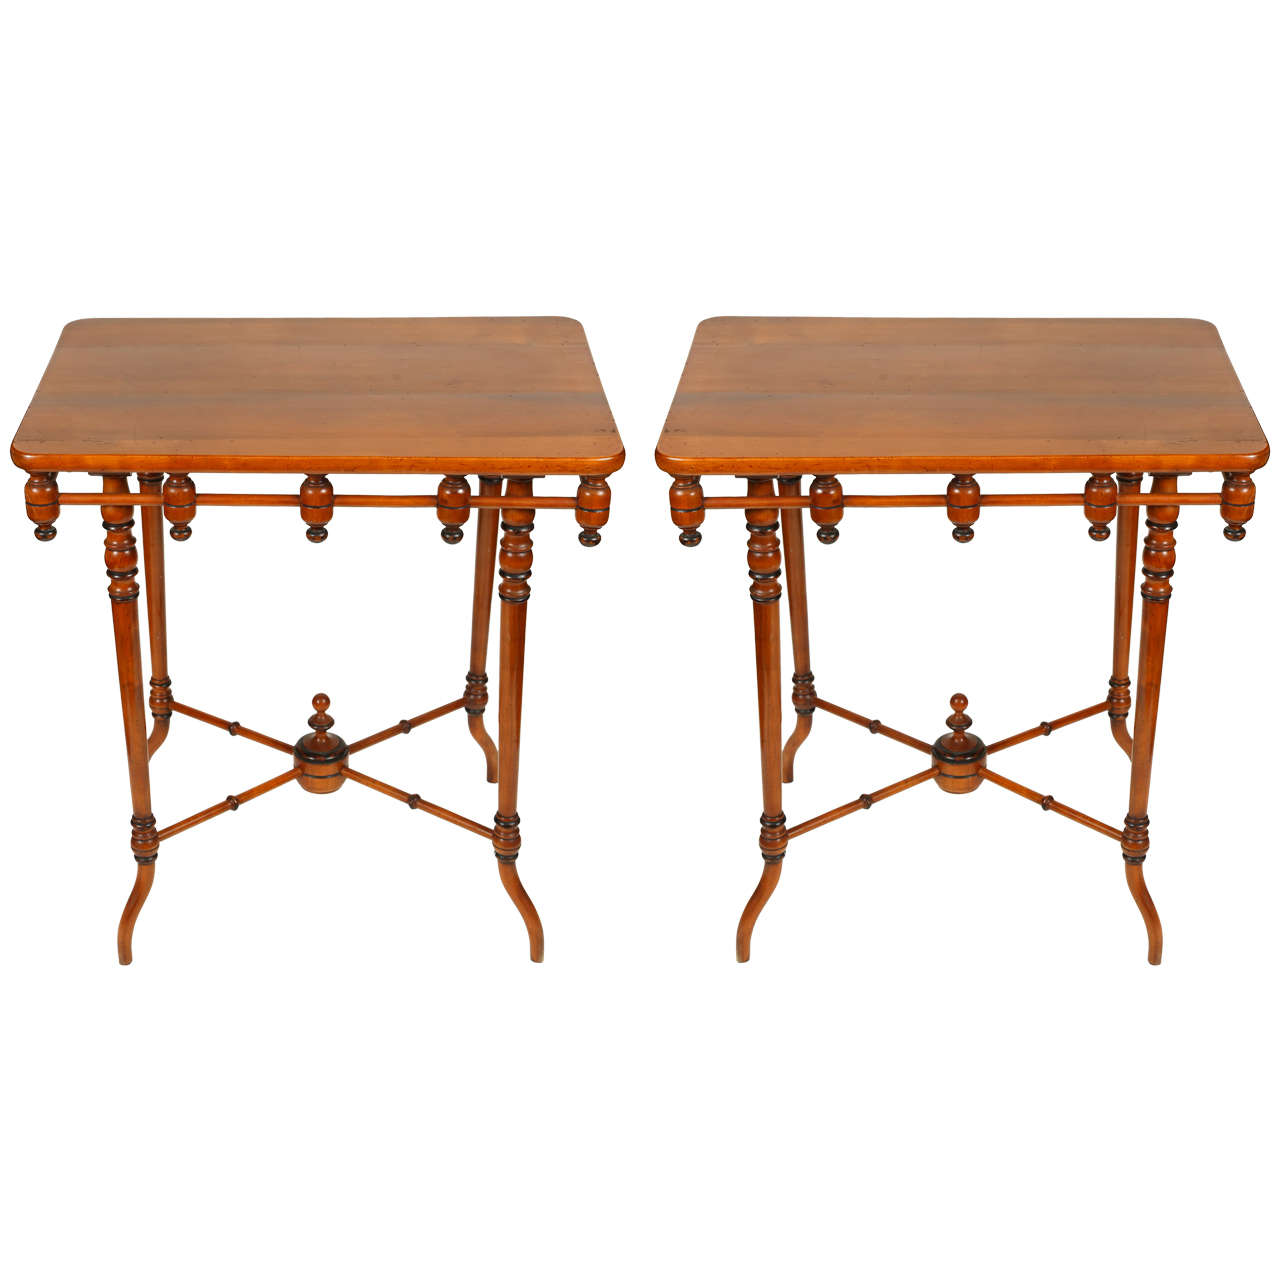 Pair of French Cherrywood Side Tables